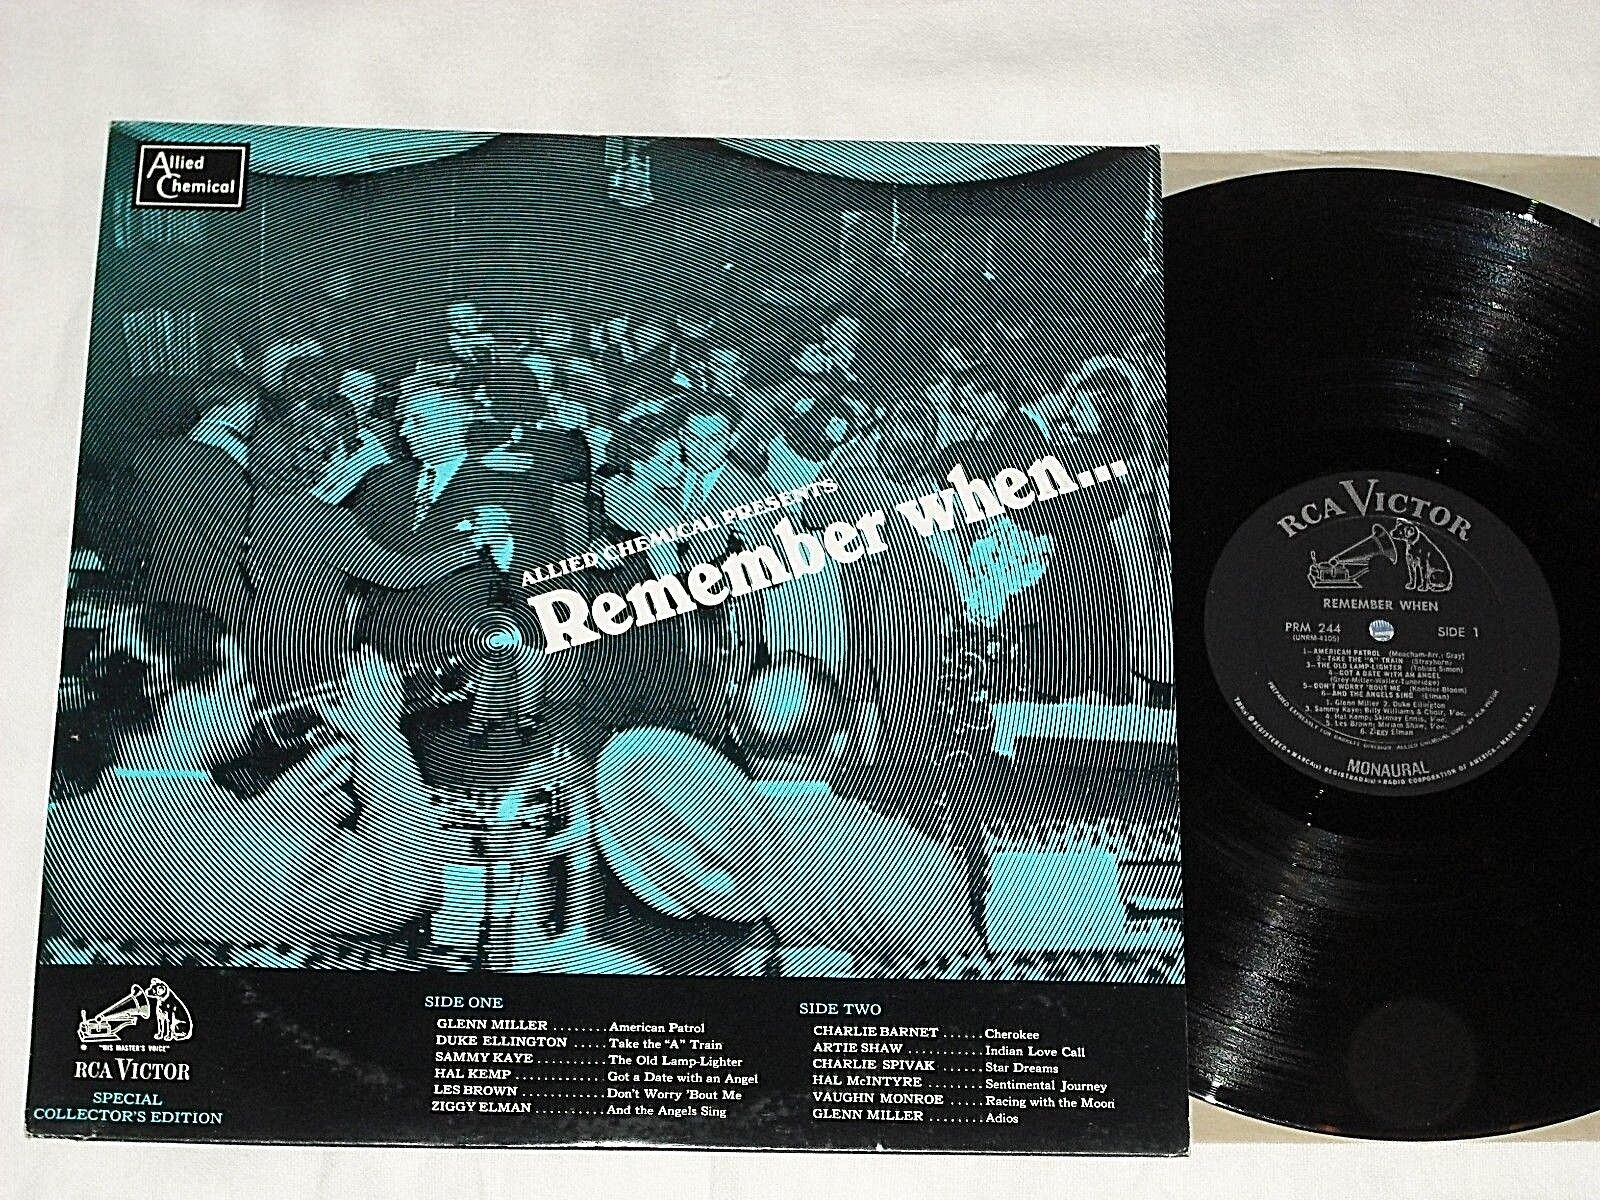 REMEMBER WHEN (1967) Mono RCA VICTOR LP for Allied Chemical 